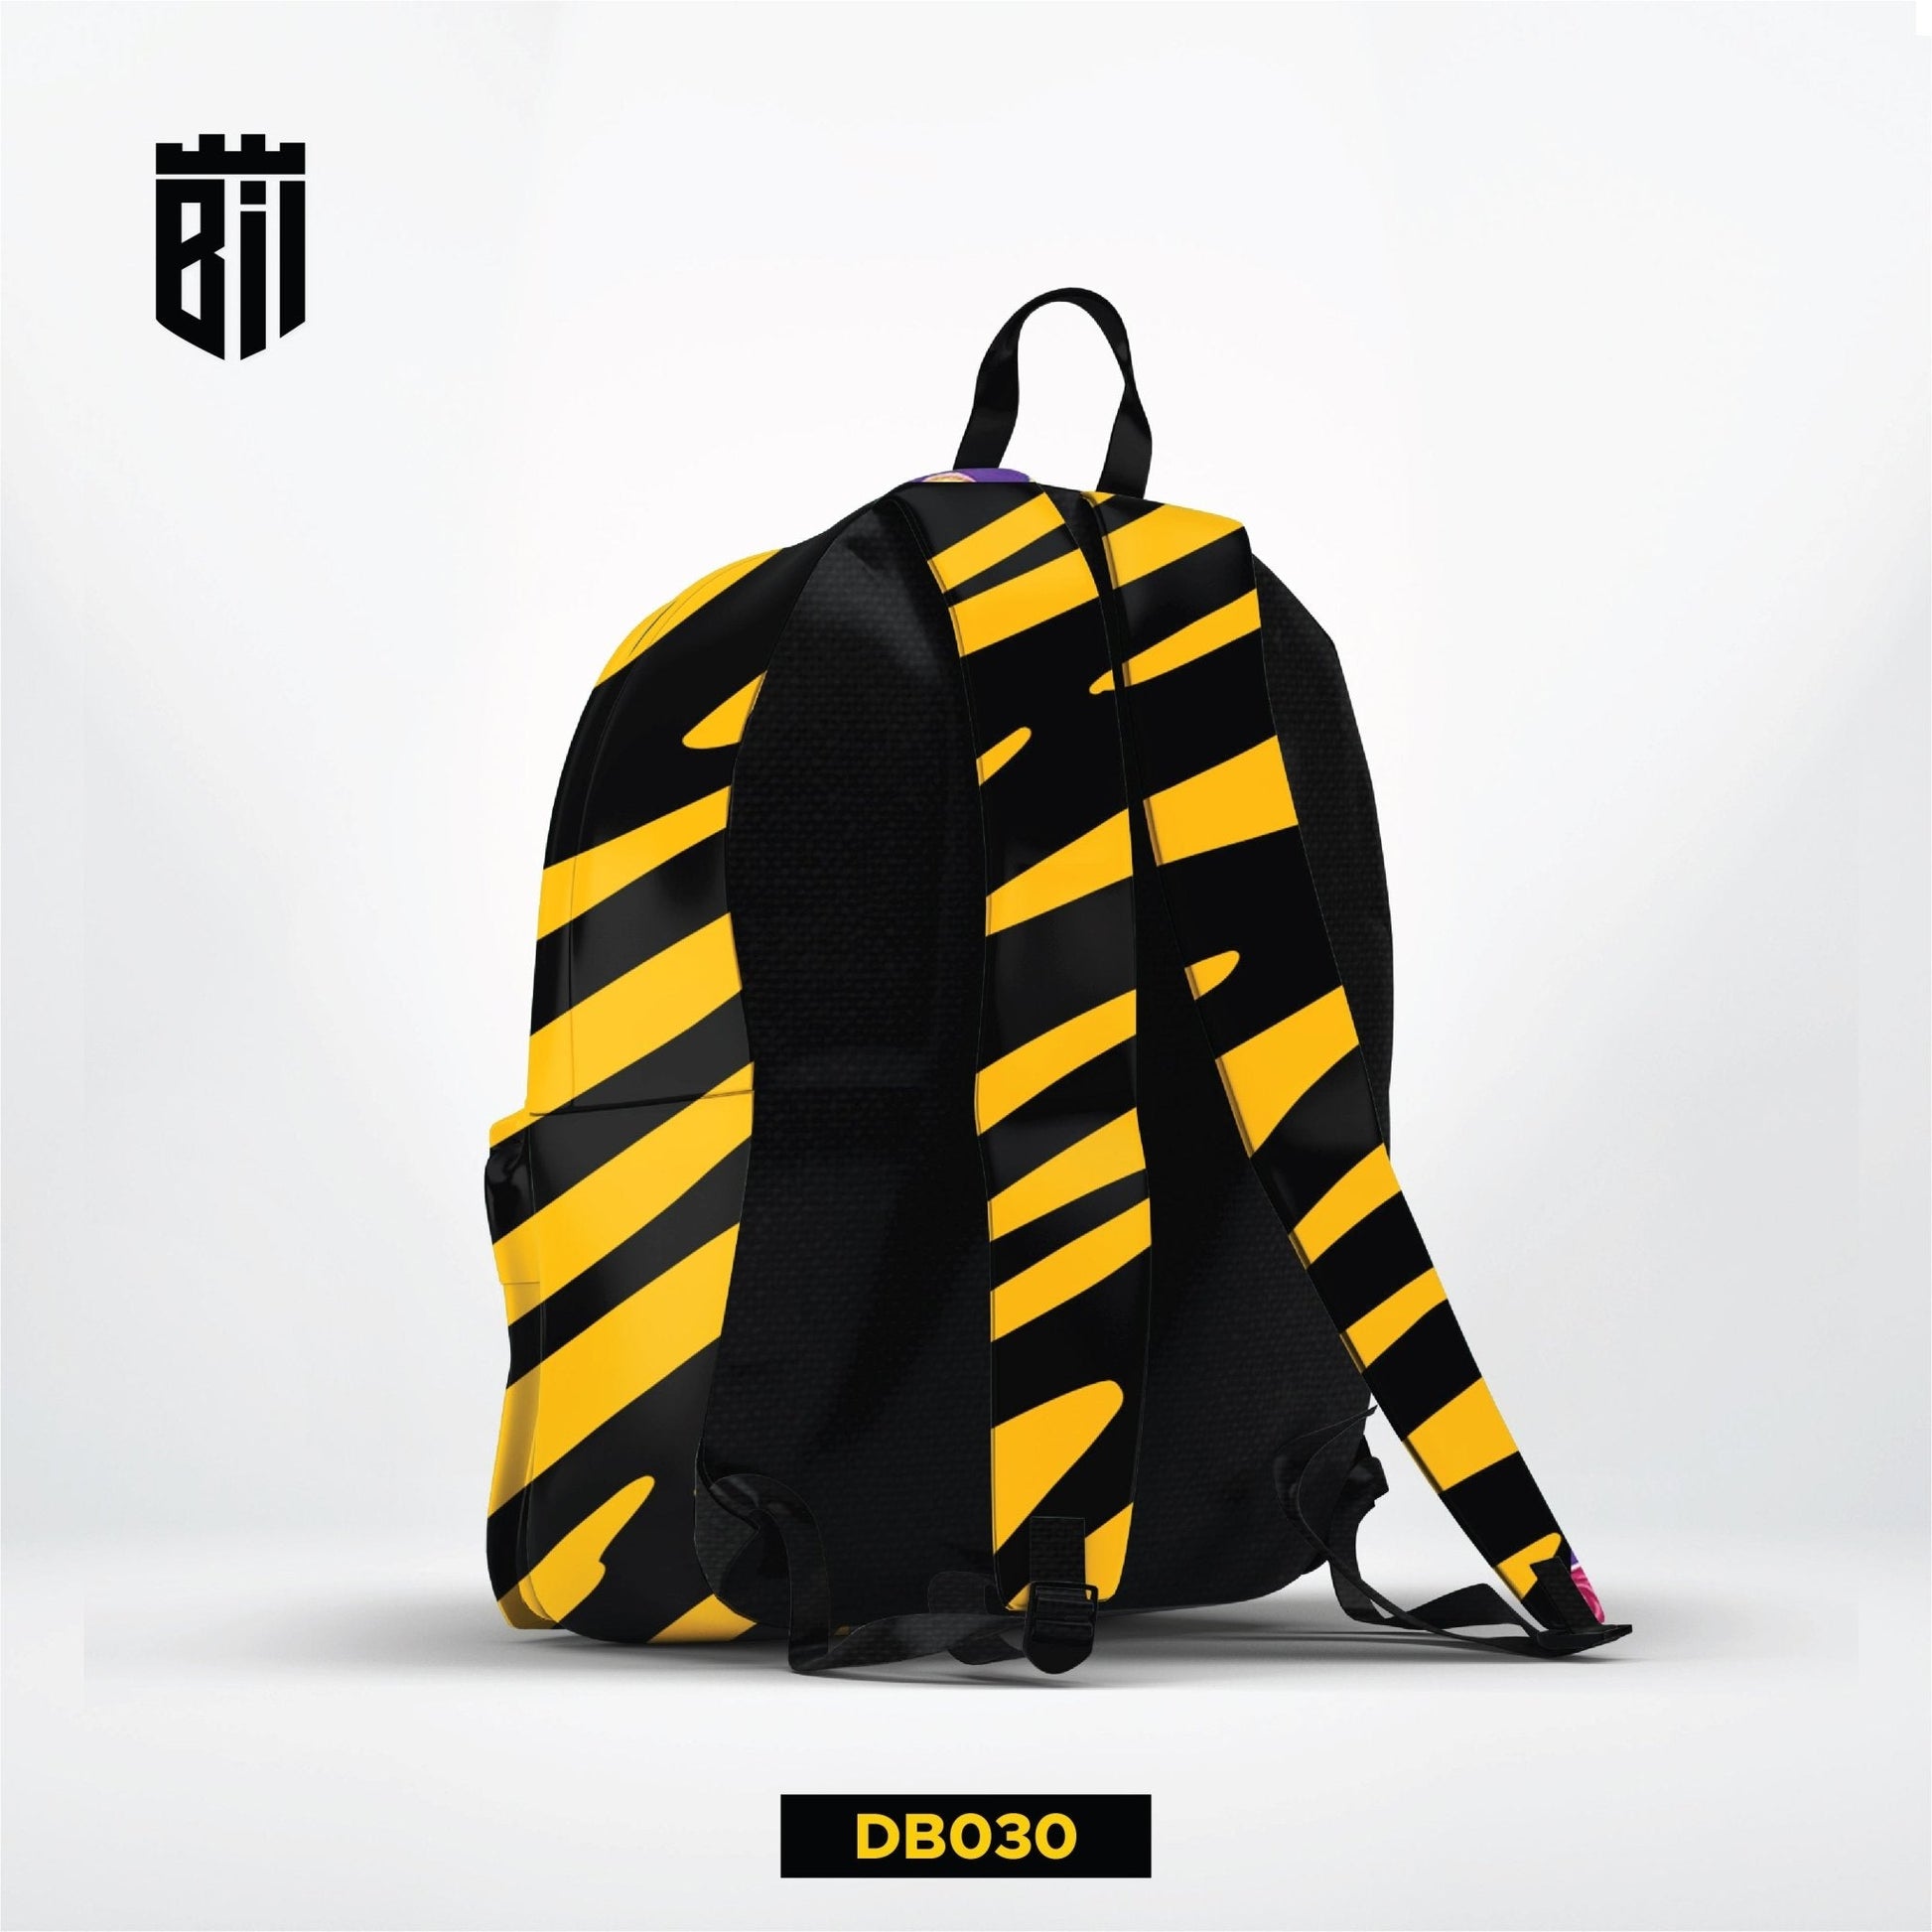 DB030 Yellow Black Pattern Allover Printed Backpack - BREACHIT